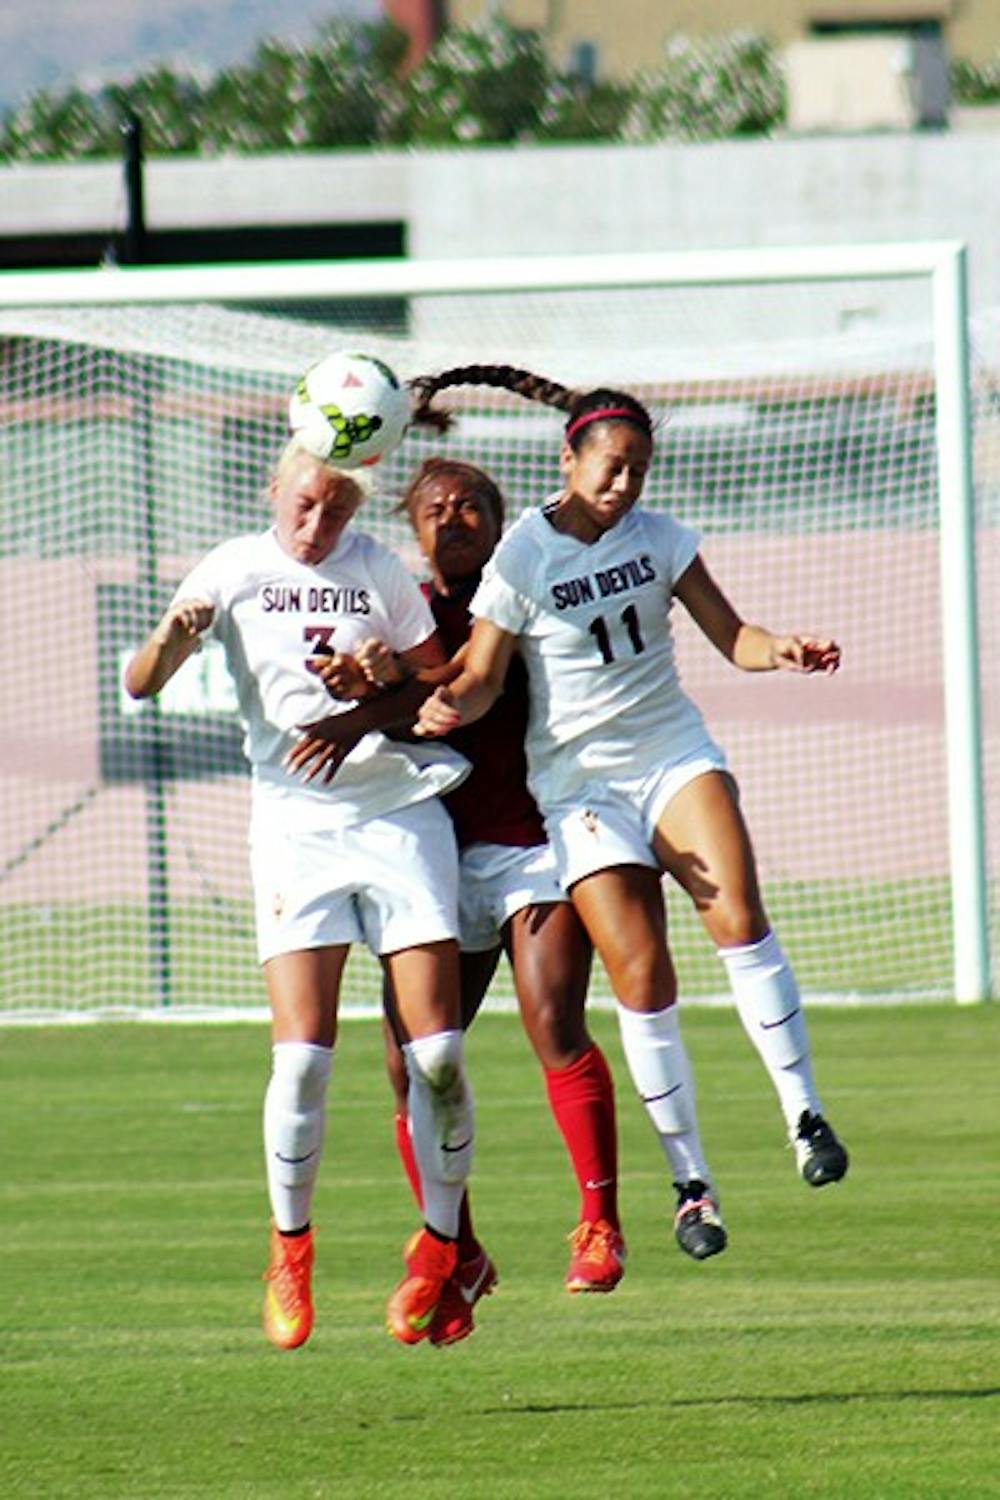 Junior defenders McKenzie Berryhill and Rachel Ometer attempt a header in a home game against Stanford on Oct. 26, 2014. Stanford won the game 2-0. (Photo by Sawyer Hardebeck)